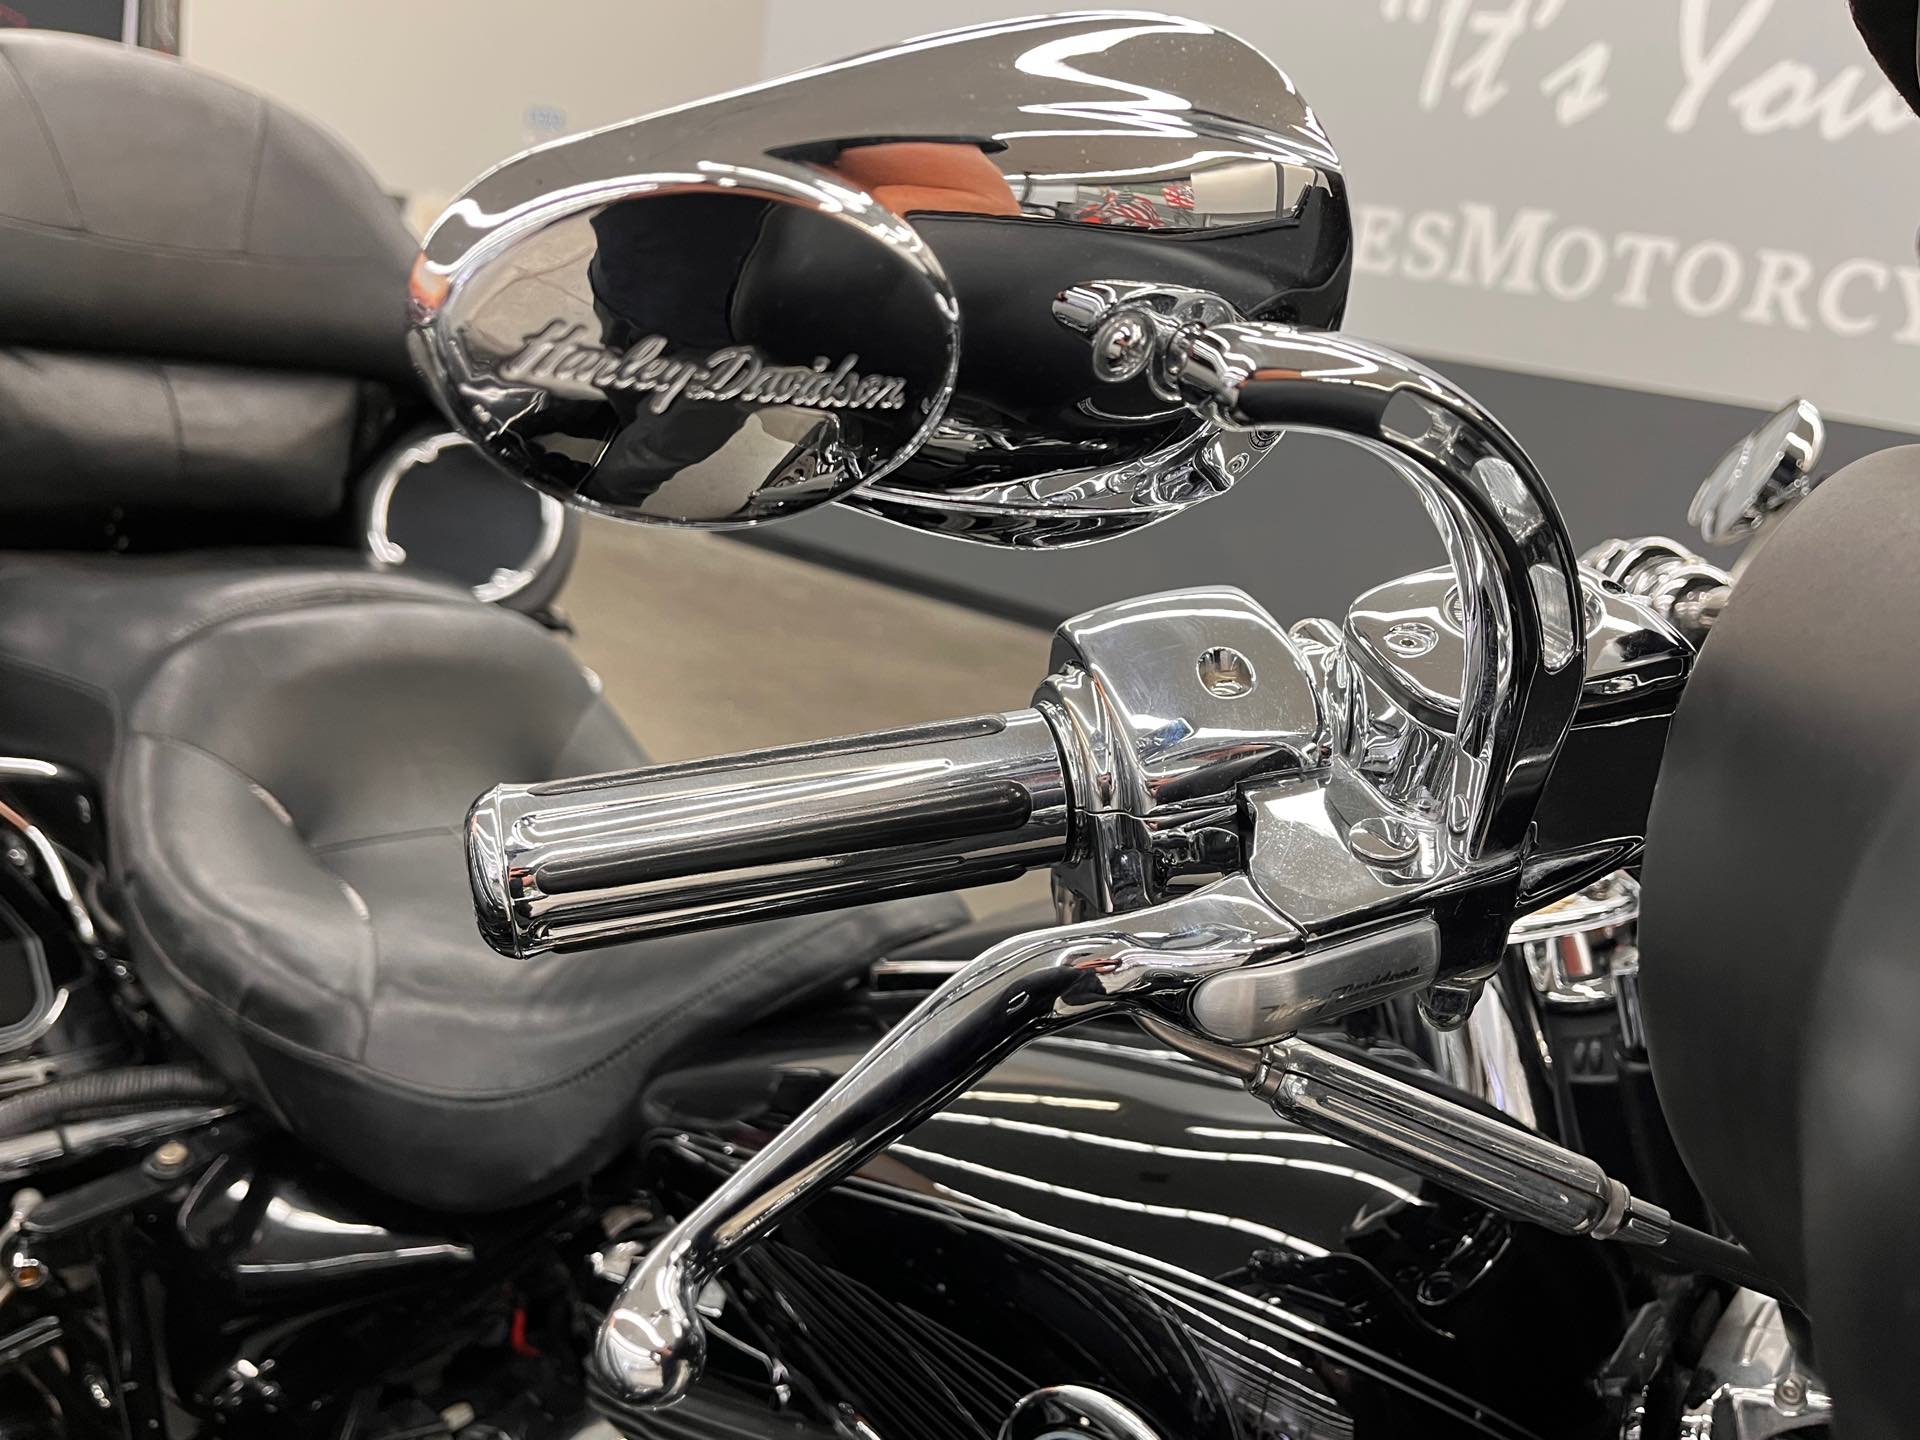 2004 Harley-Davidson Electra Glide Ultra Classic at Aces Motorcycles - Denver